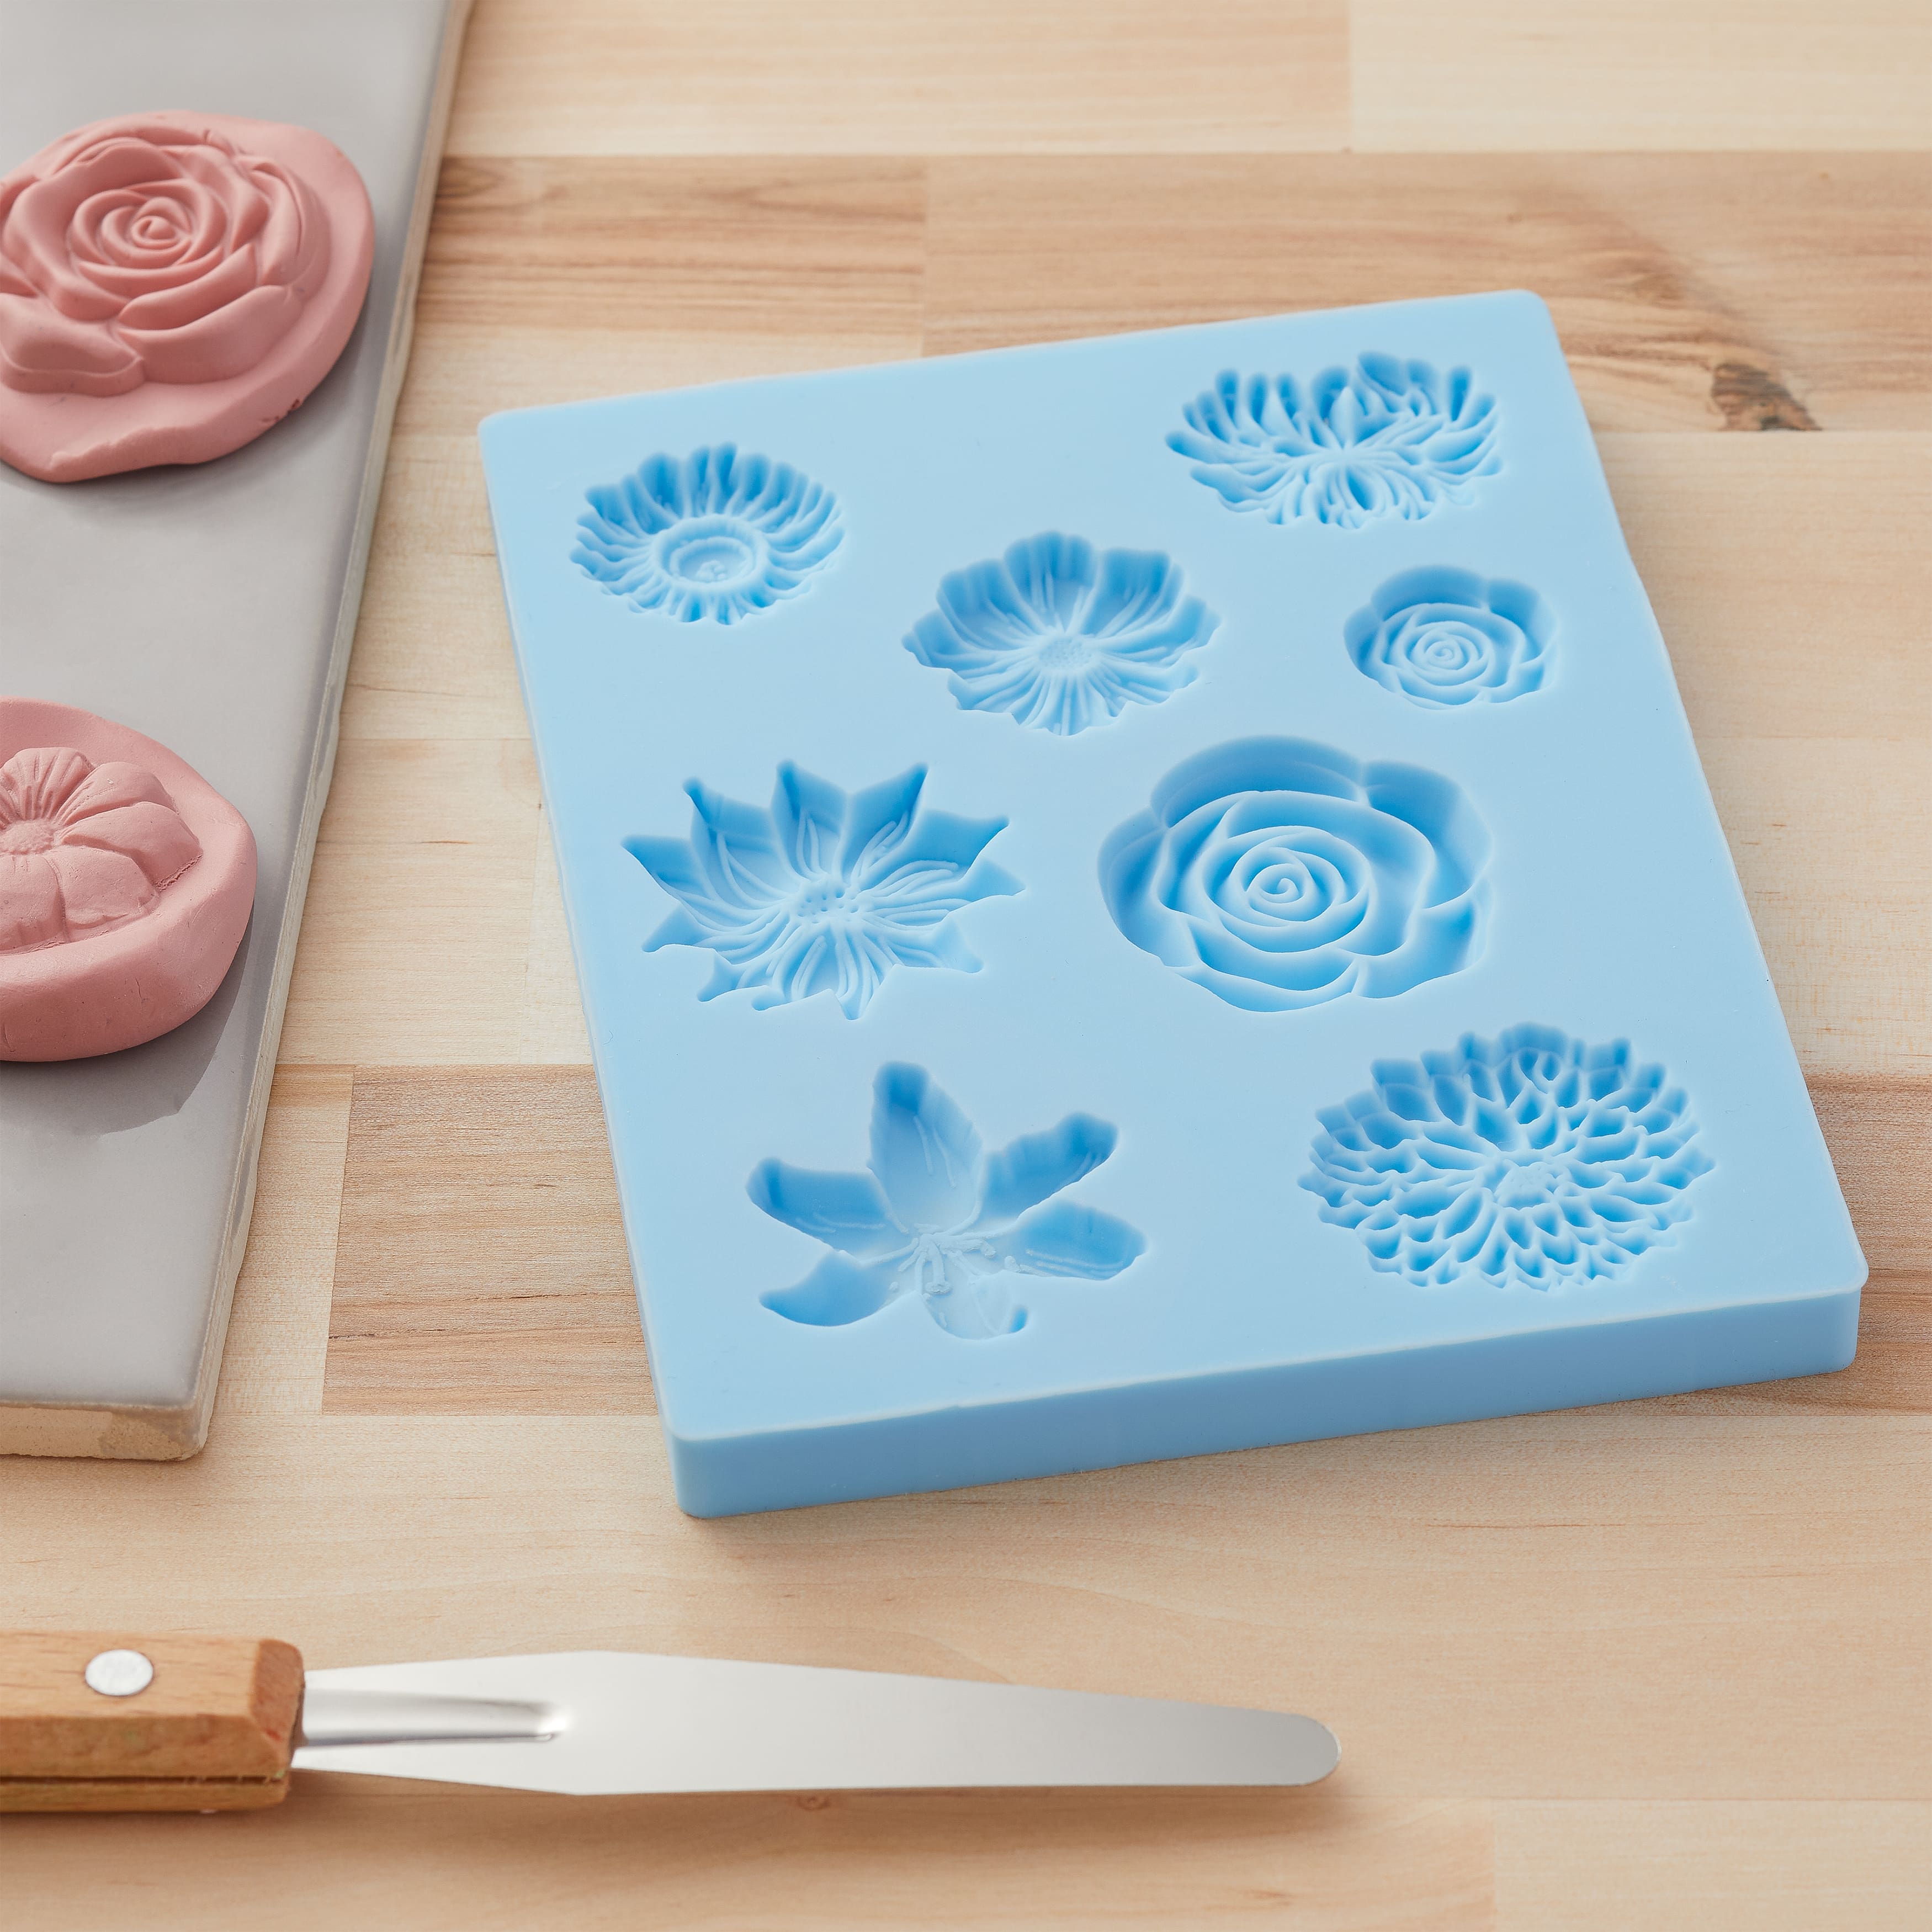 12 Pack: Floral Premium Push Mold by Craft Smart&#xAE;